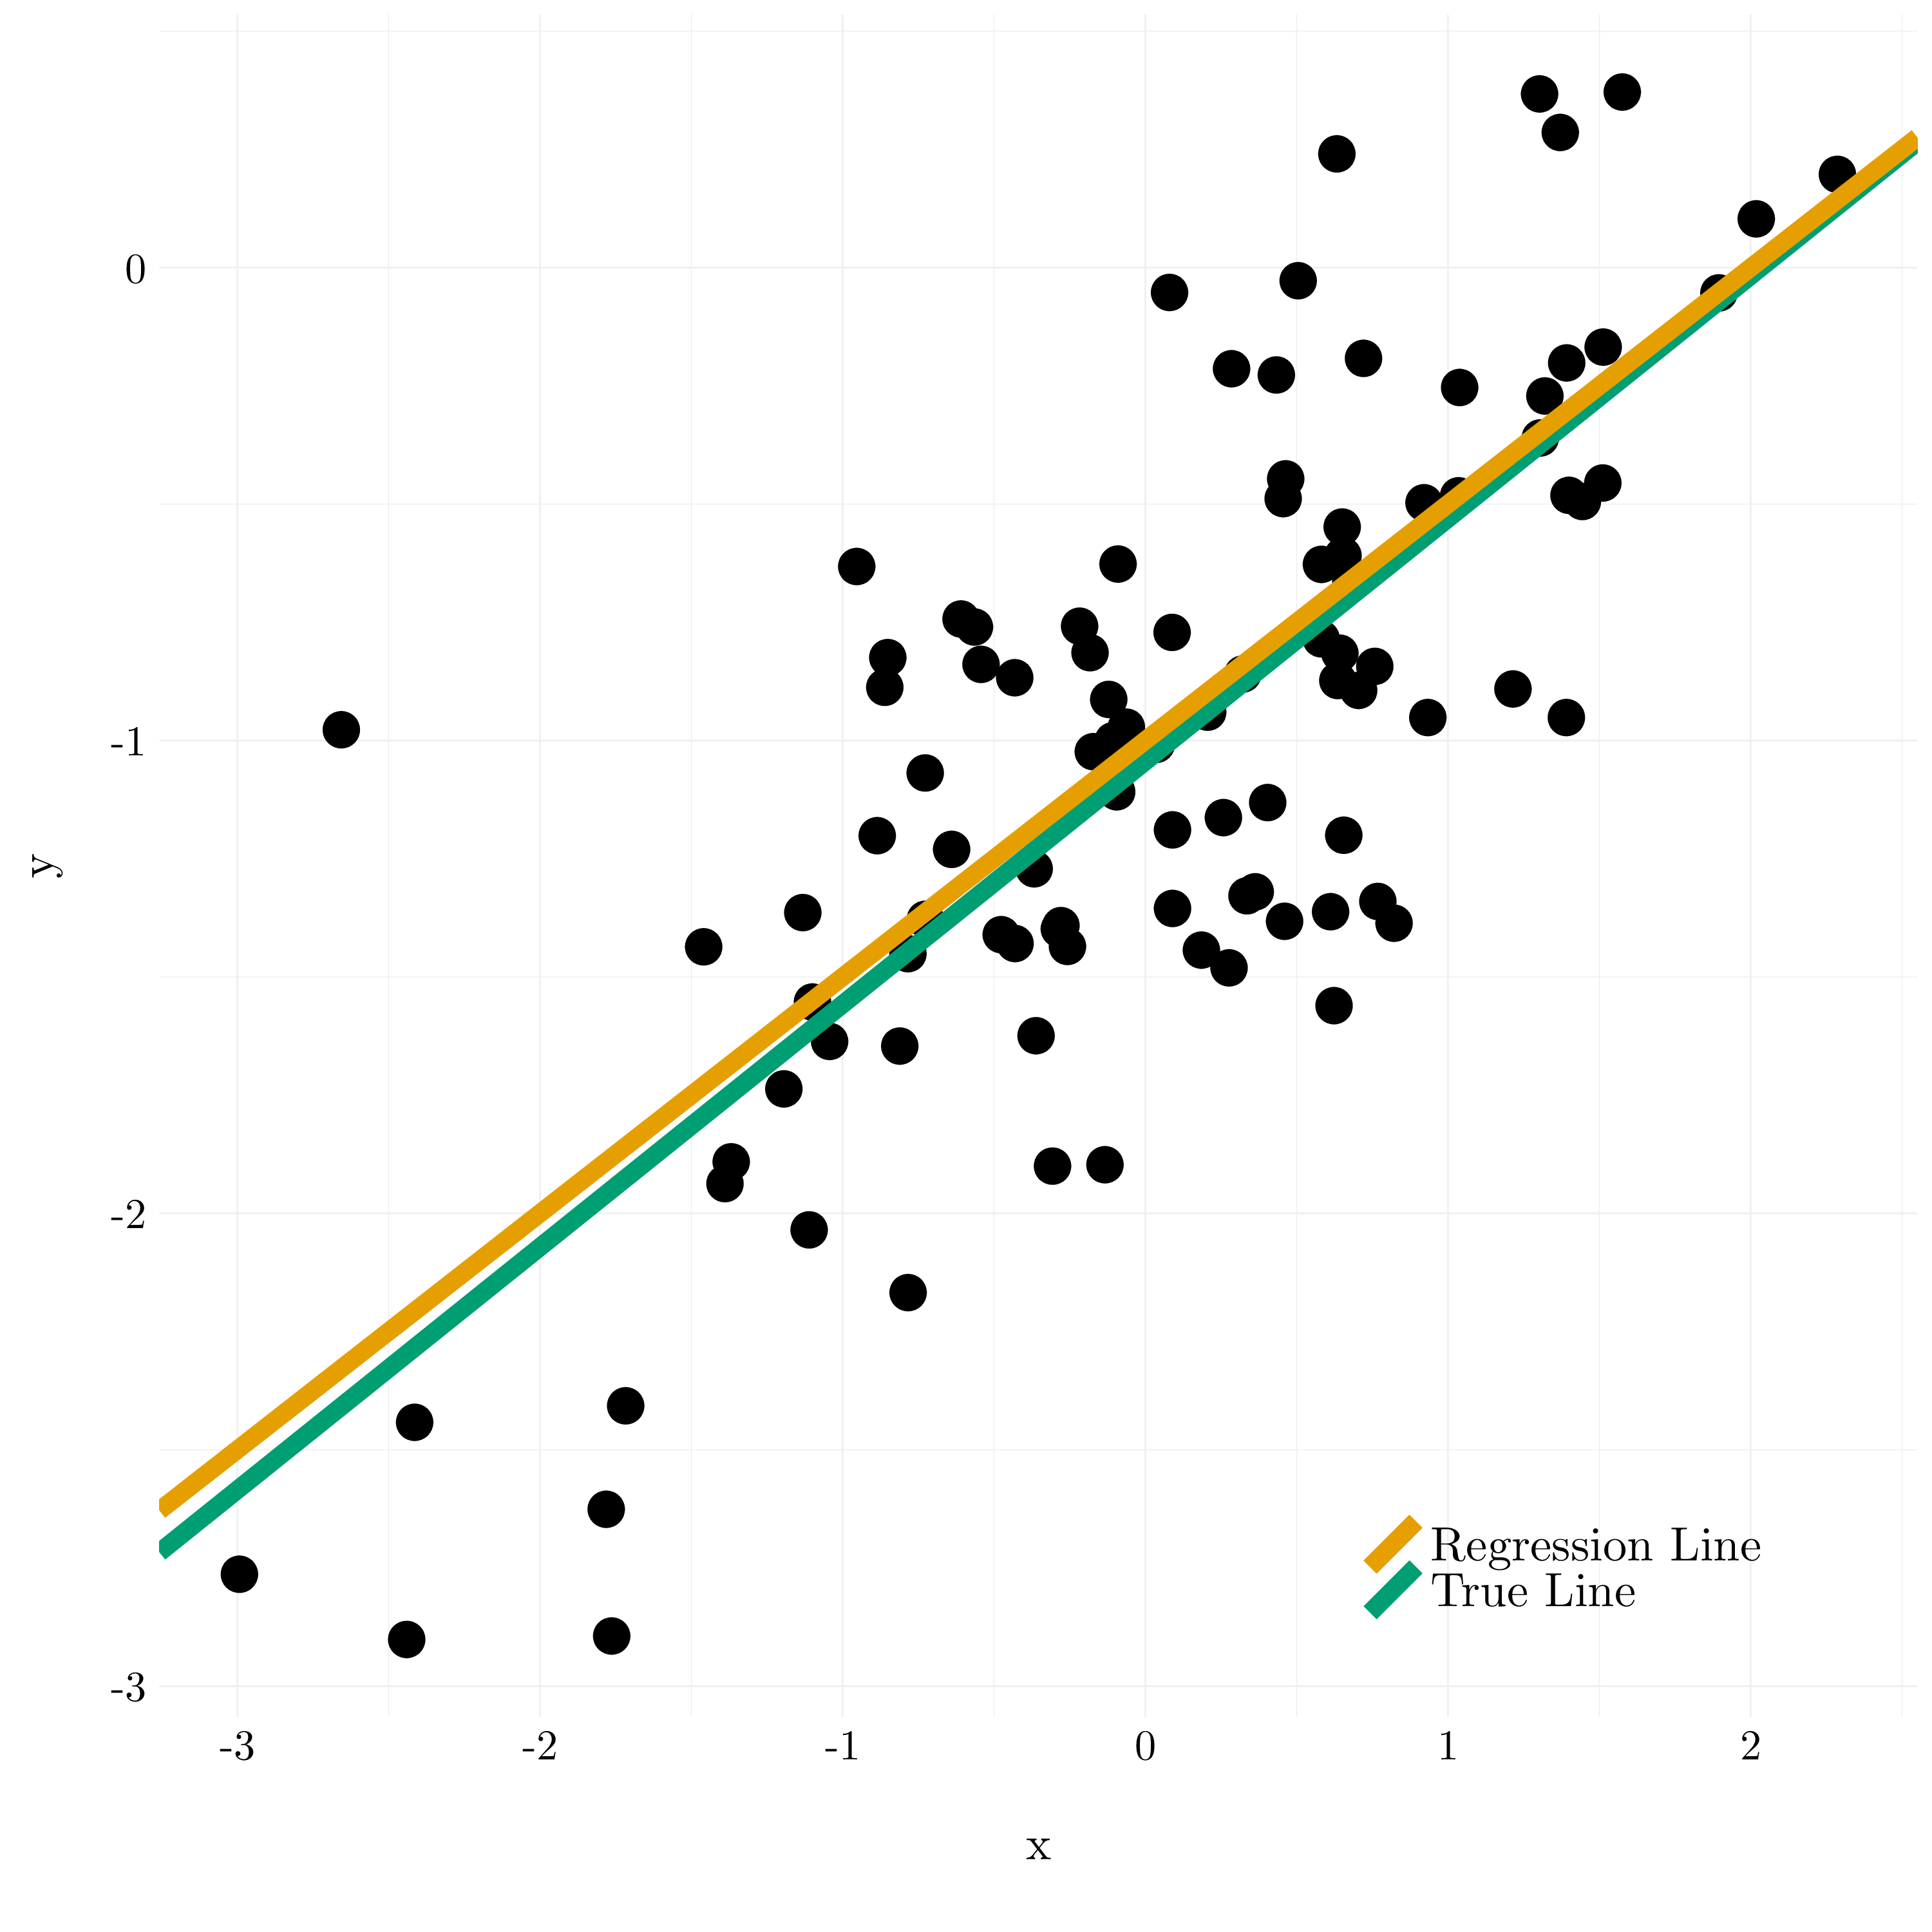 Results of the linear regression of y against x.